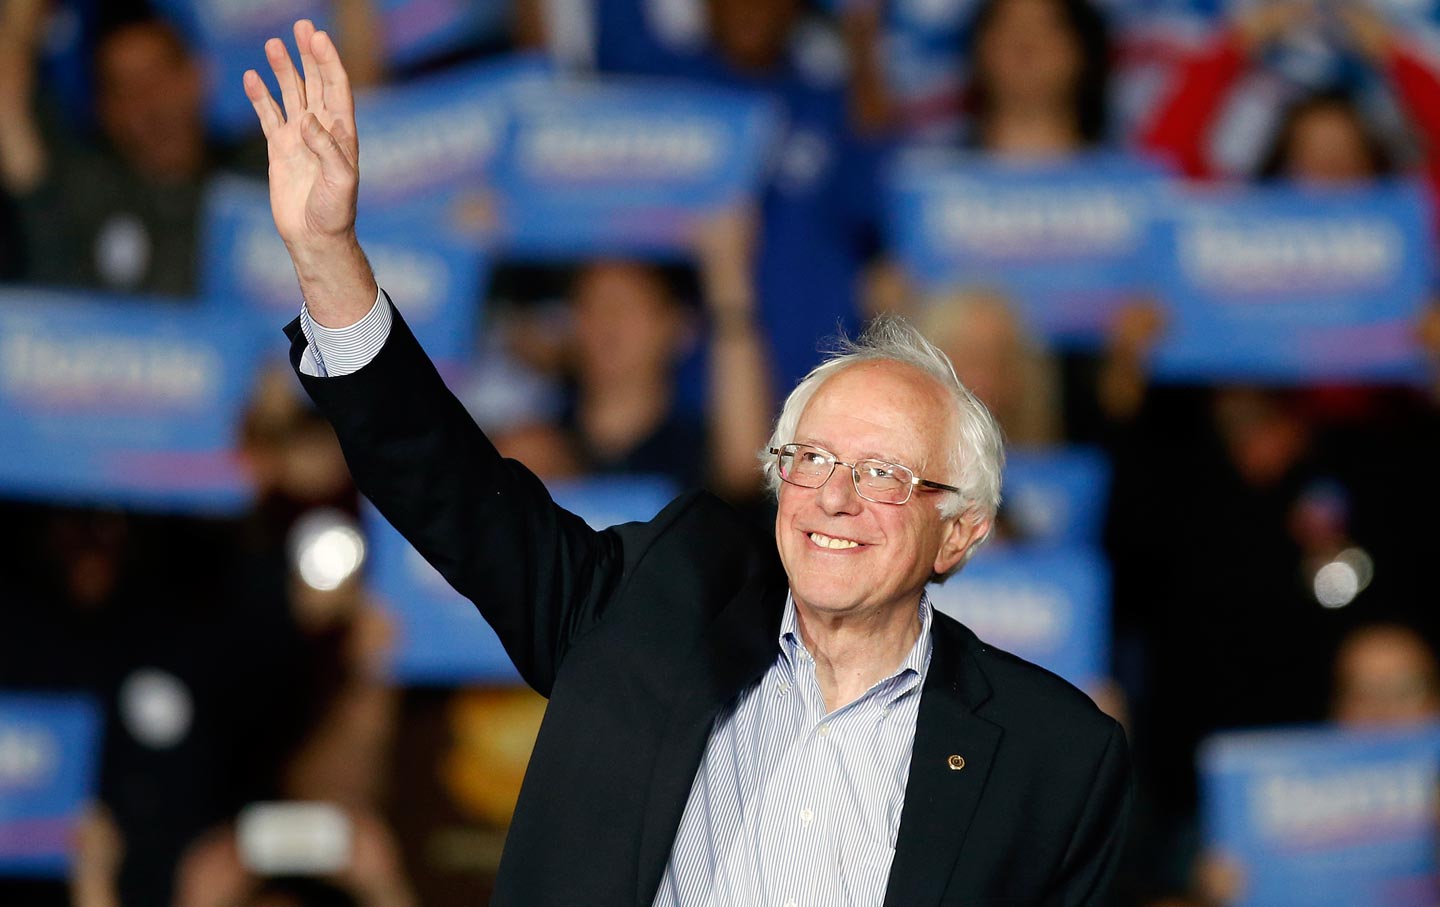 Bernie Sanders Should Push for a New Realism in Foreign Policy